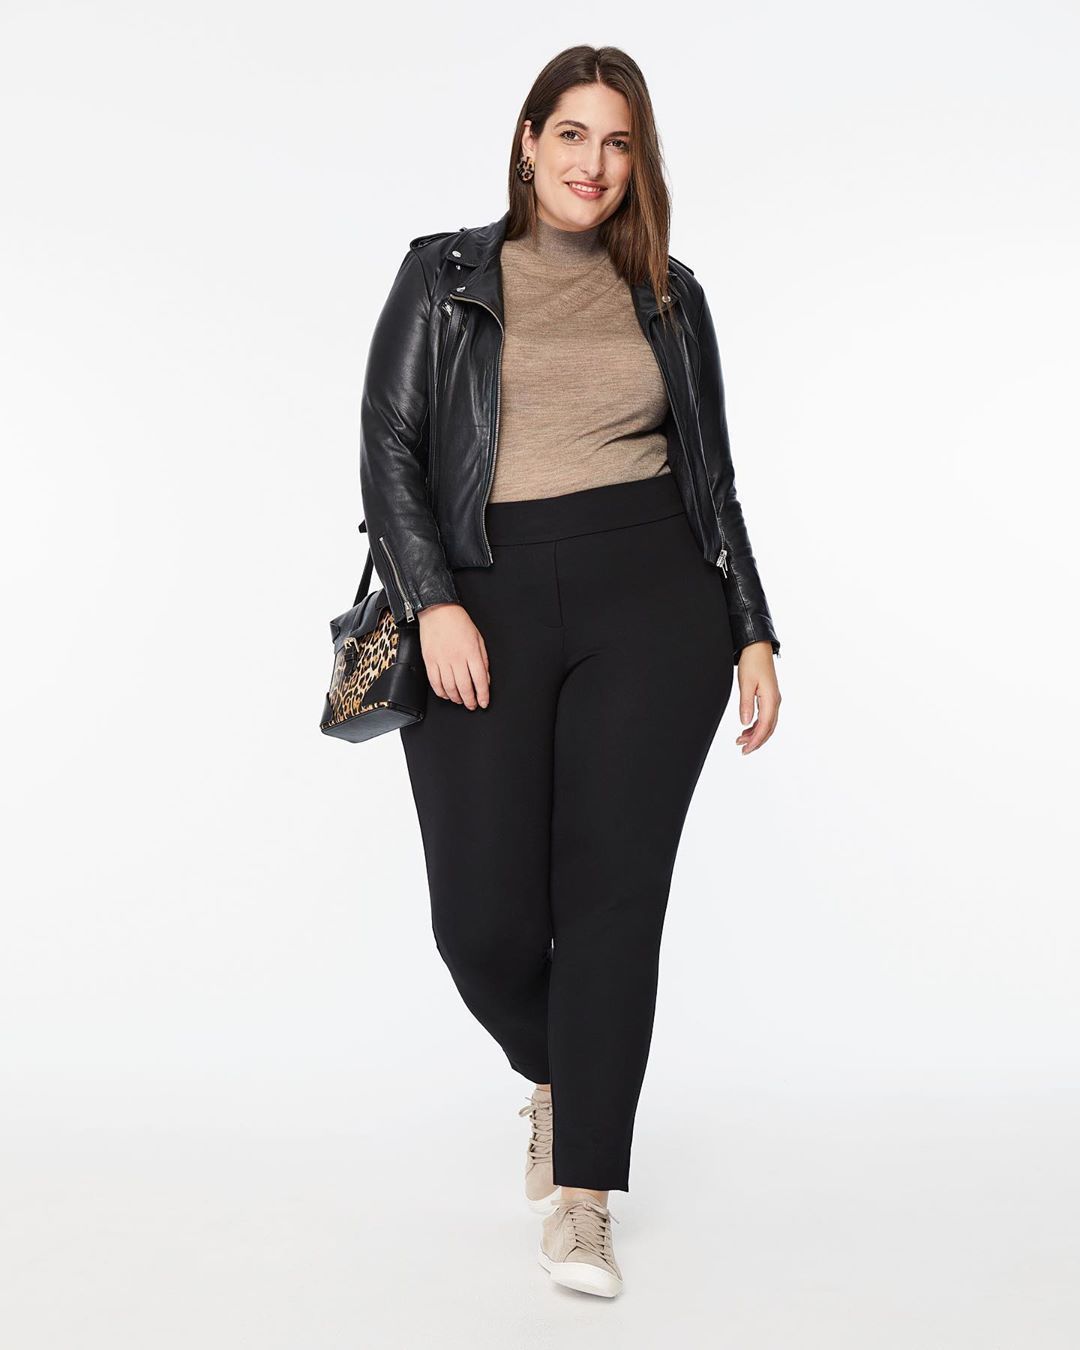 How to choose your plus size pants for work? – Margaret M